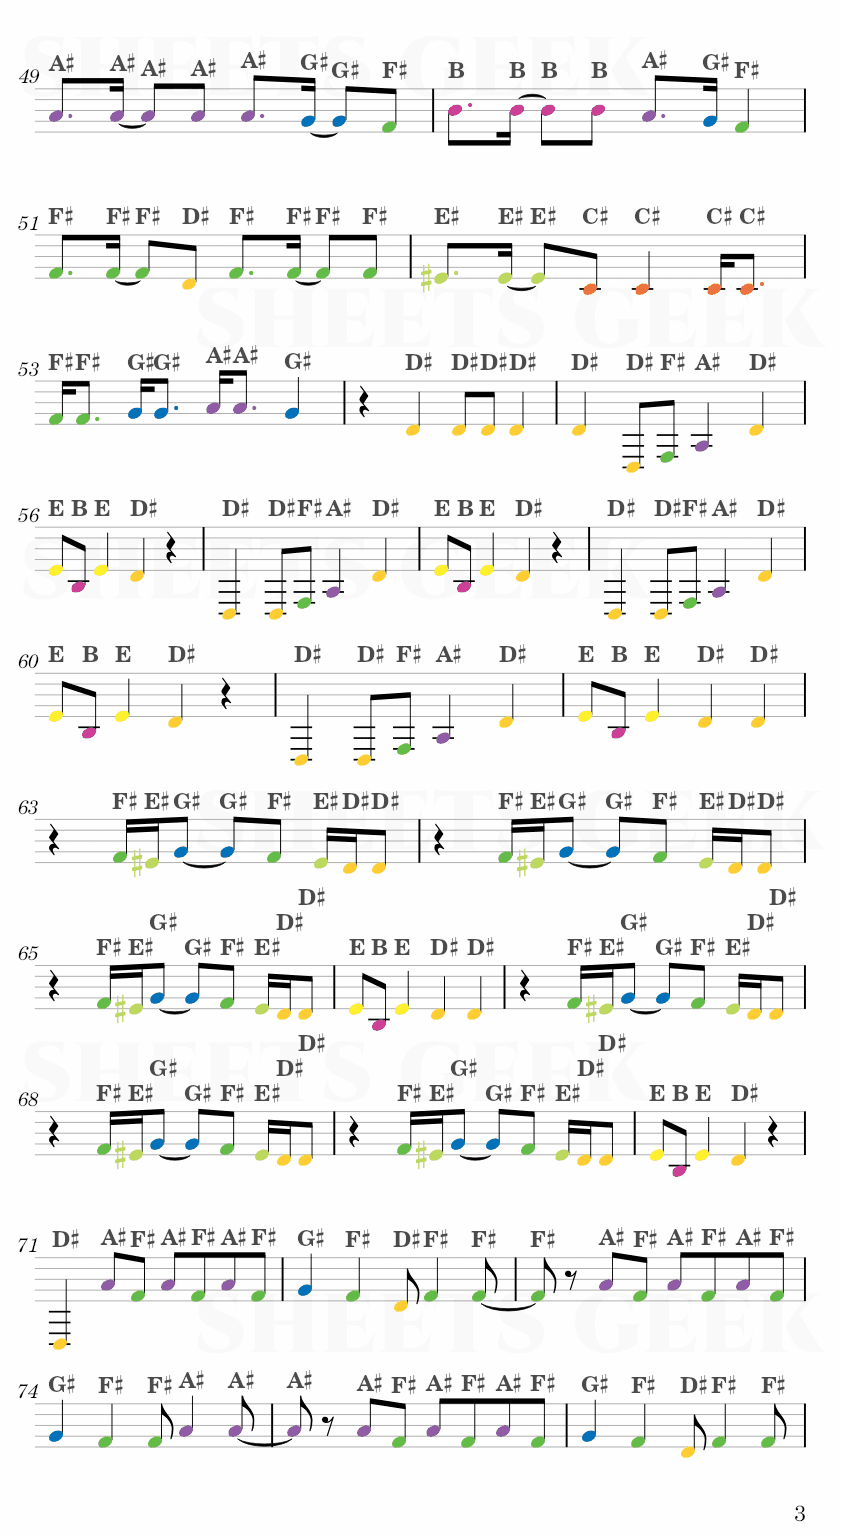 How You Like That - BLACKPINK Easy Sheet Music Free for piano, keyboard, flute, violin, sax, cello page 3